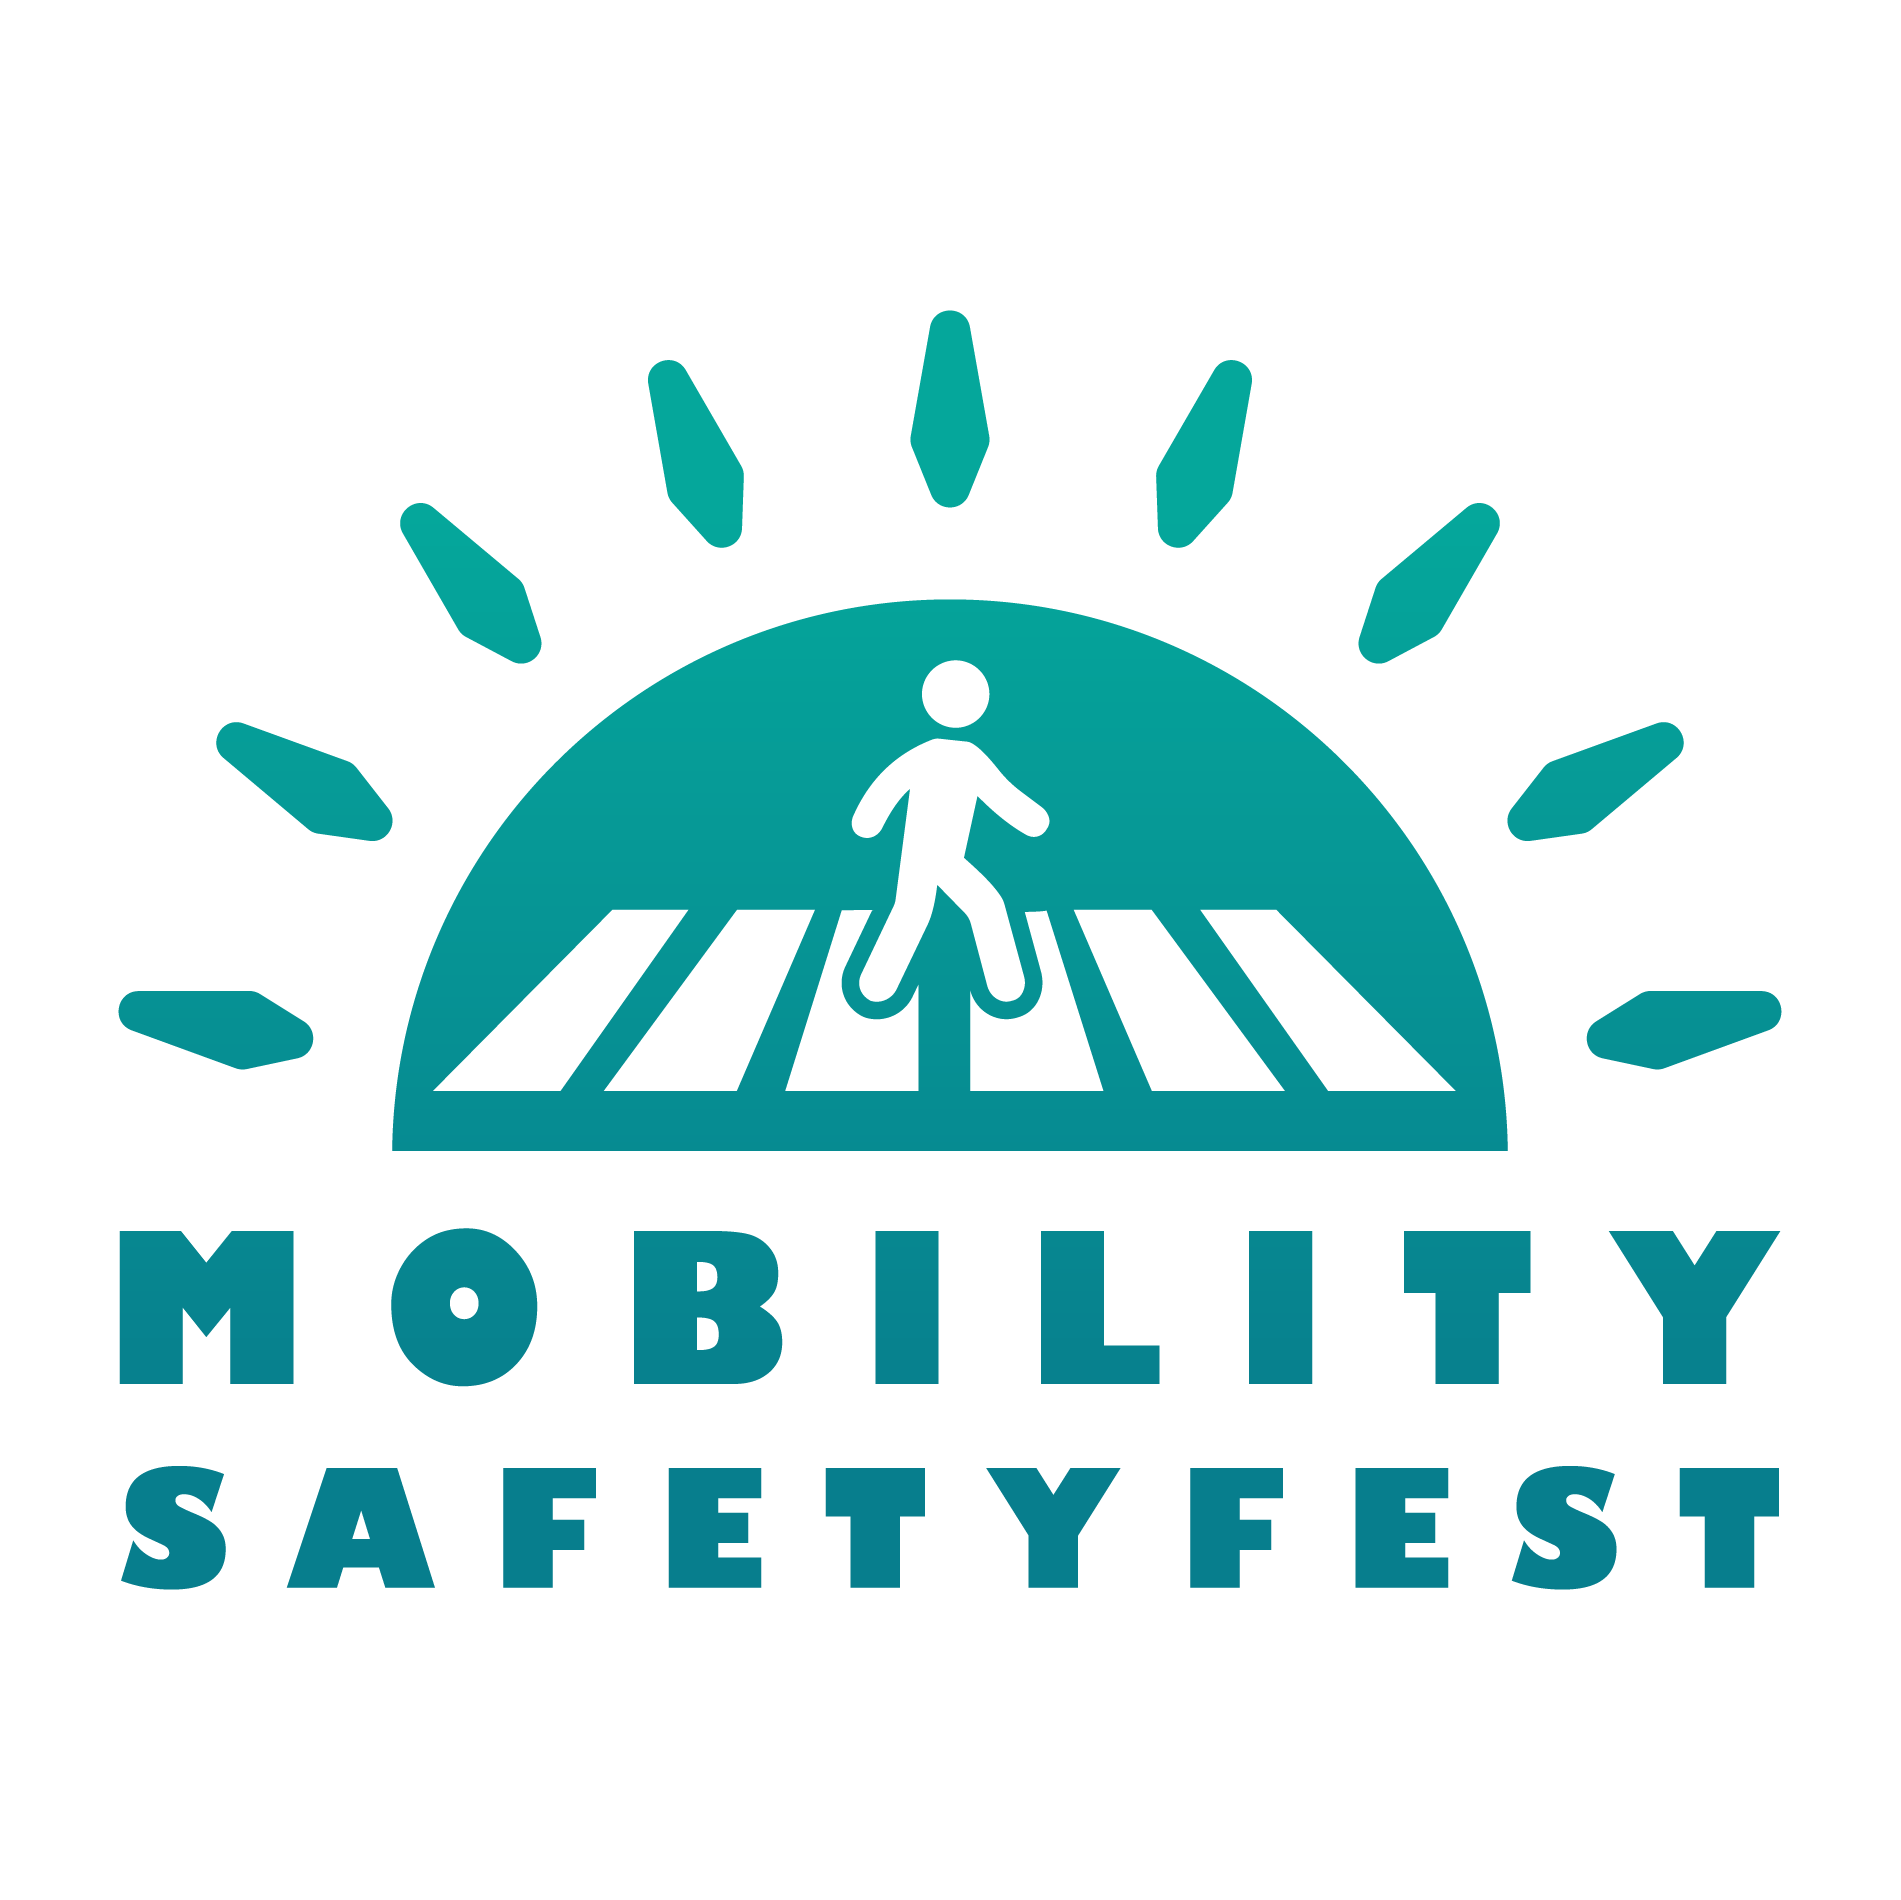 The logo for Mobility Safety Fest featuring a person walking in a crosswalk.